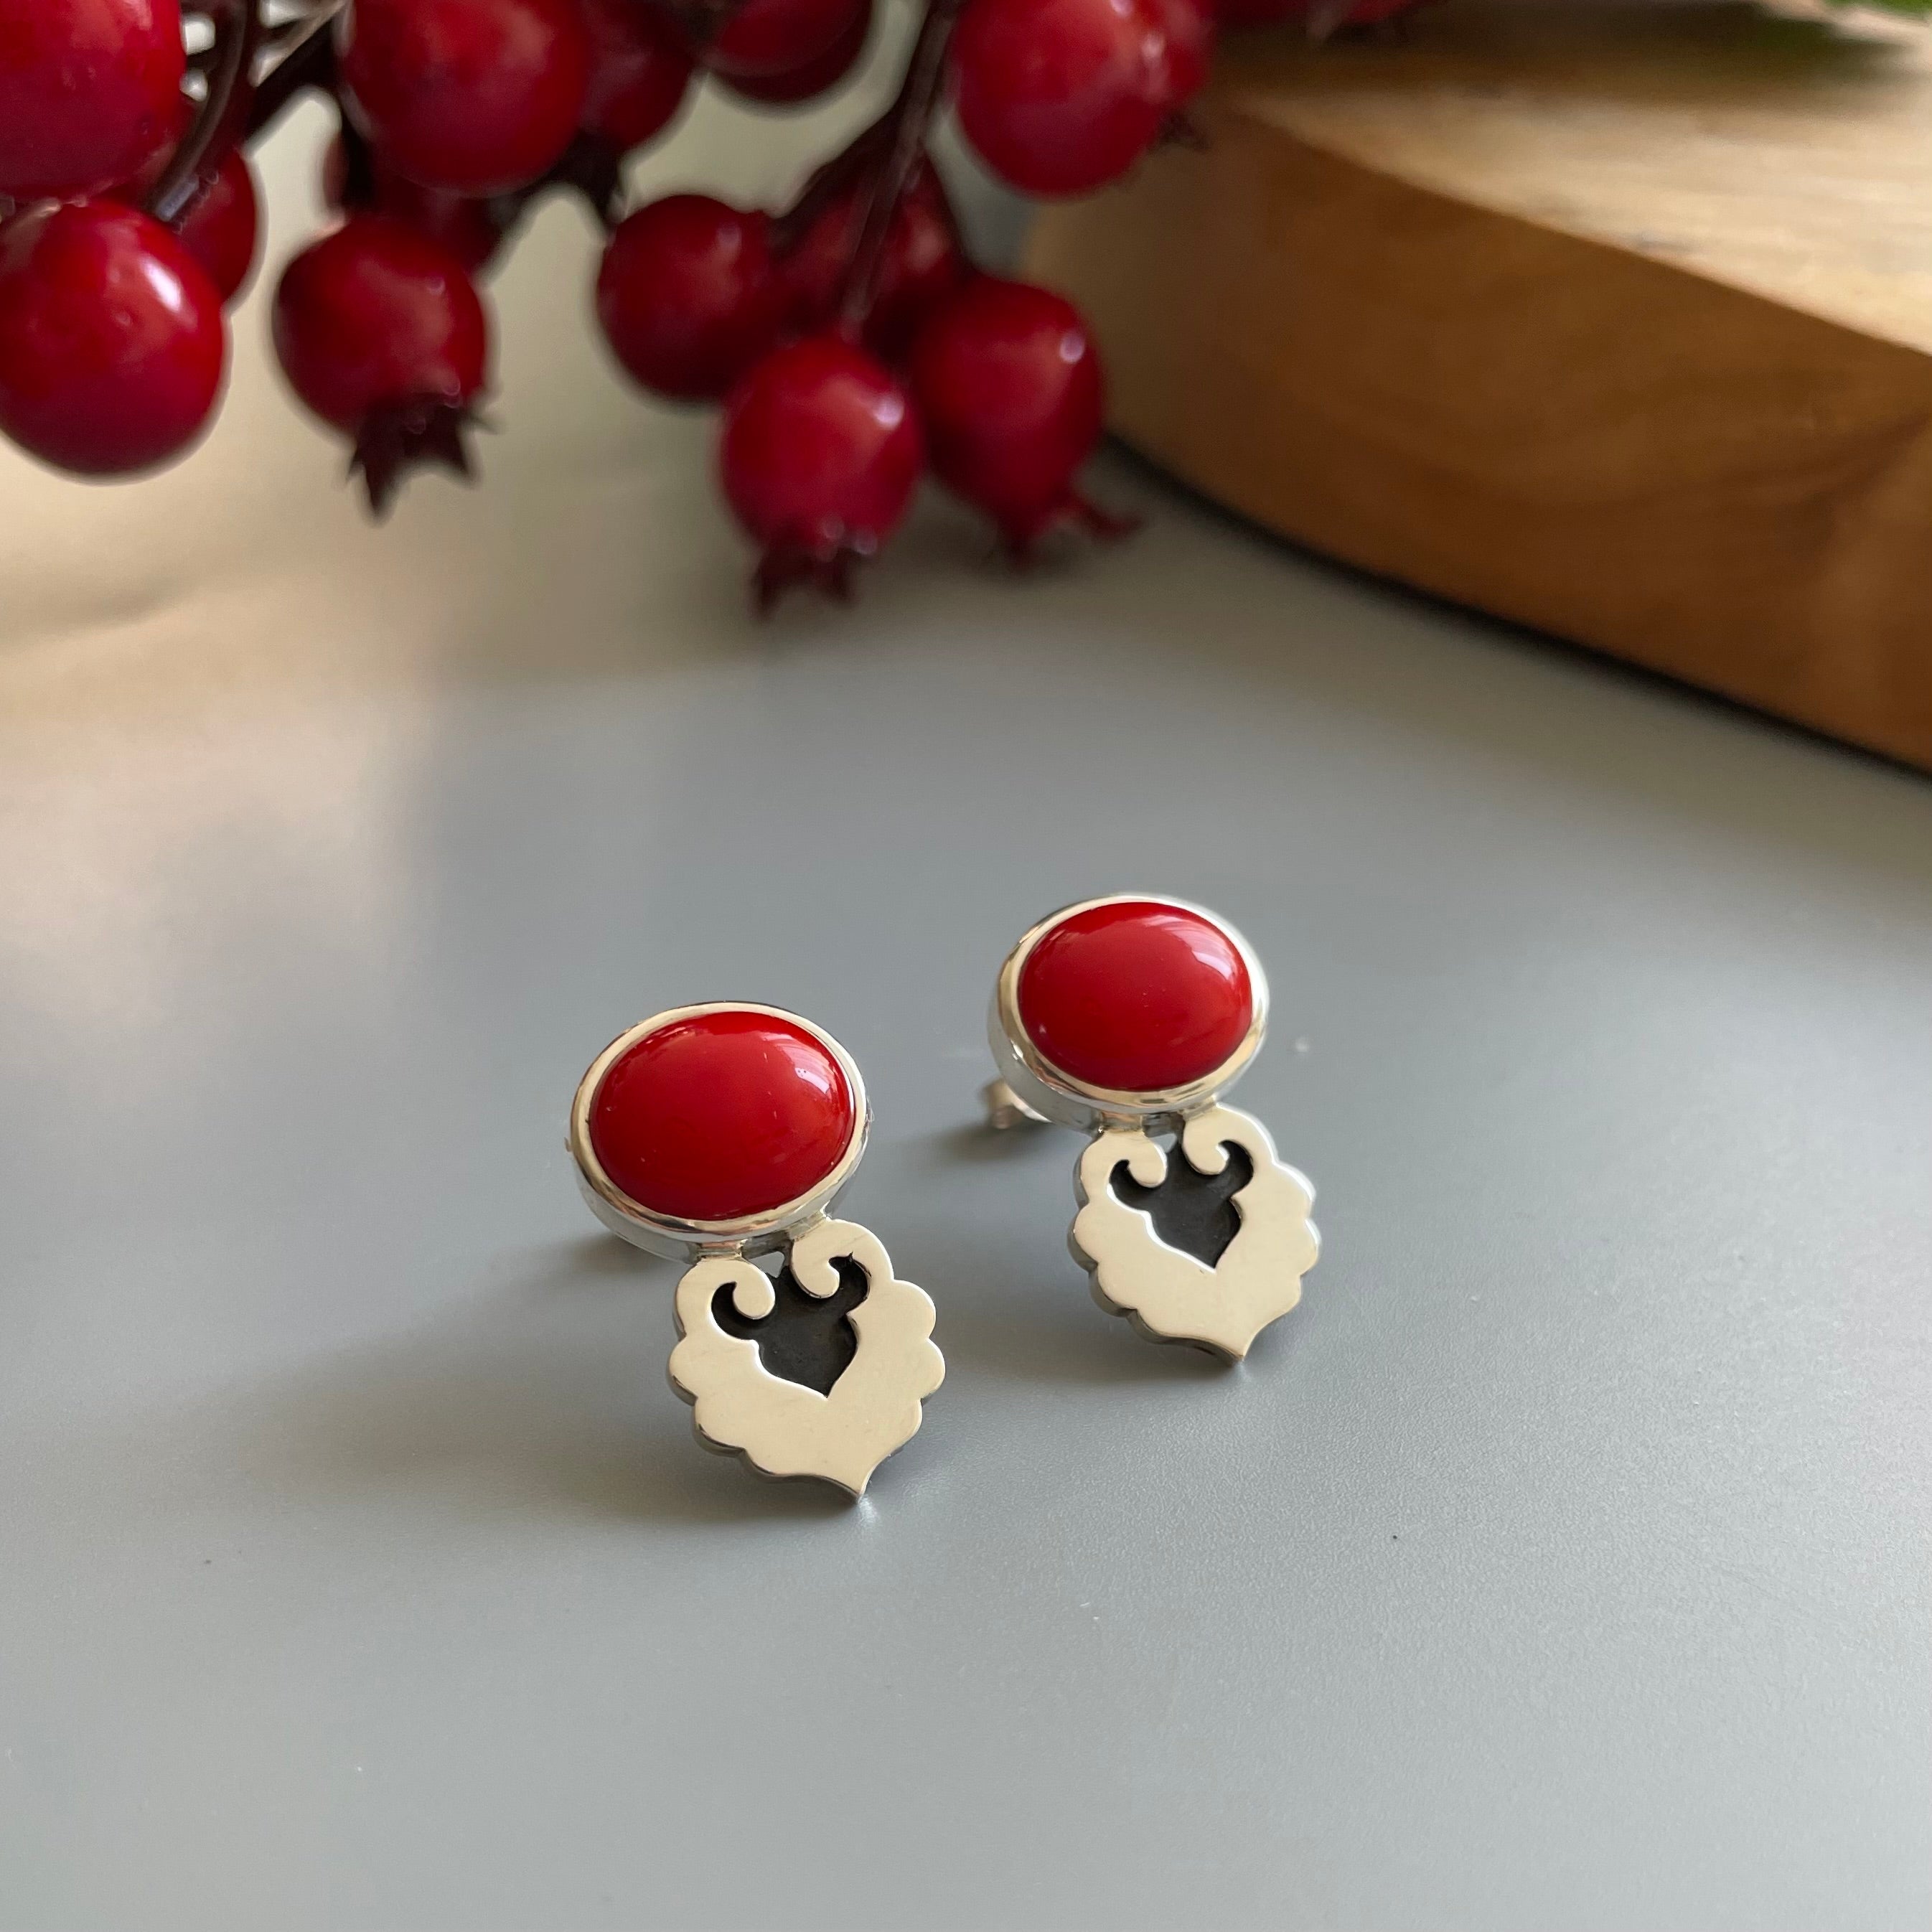 Handmade Minimal Silver Earrings with Coral